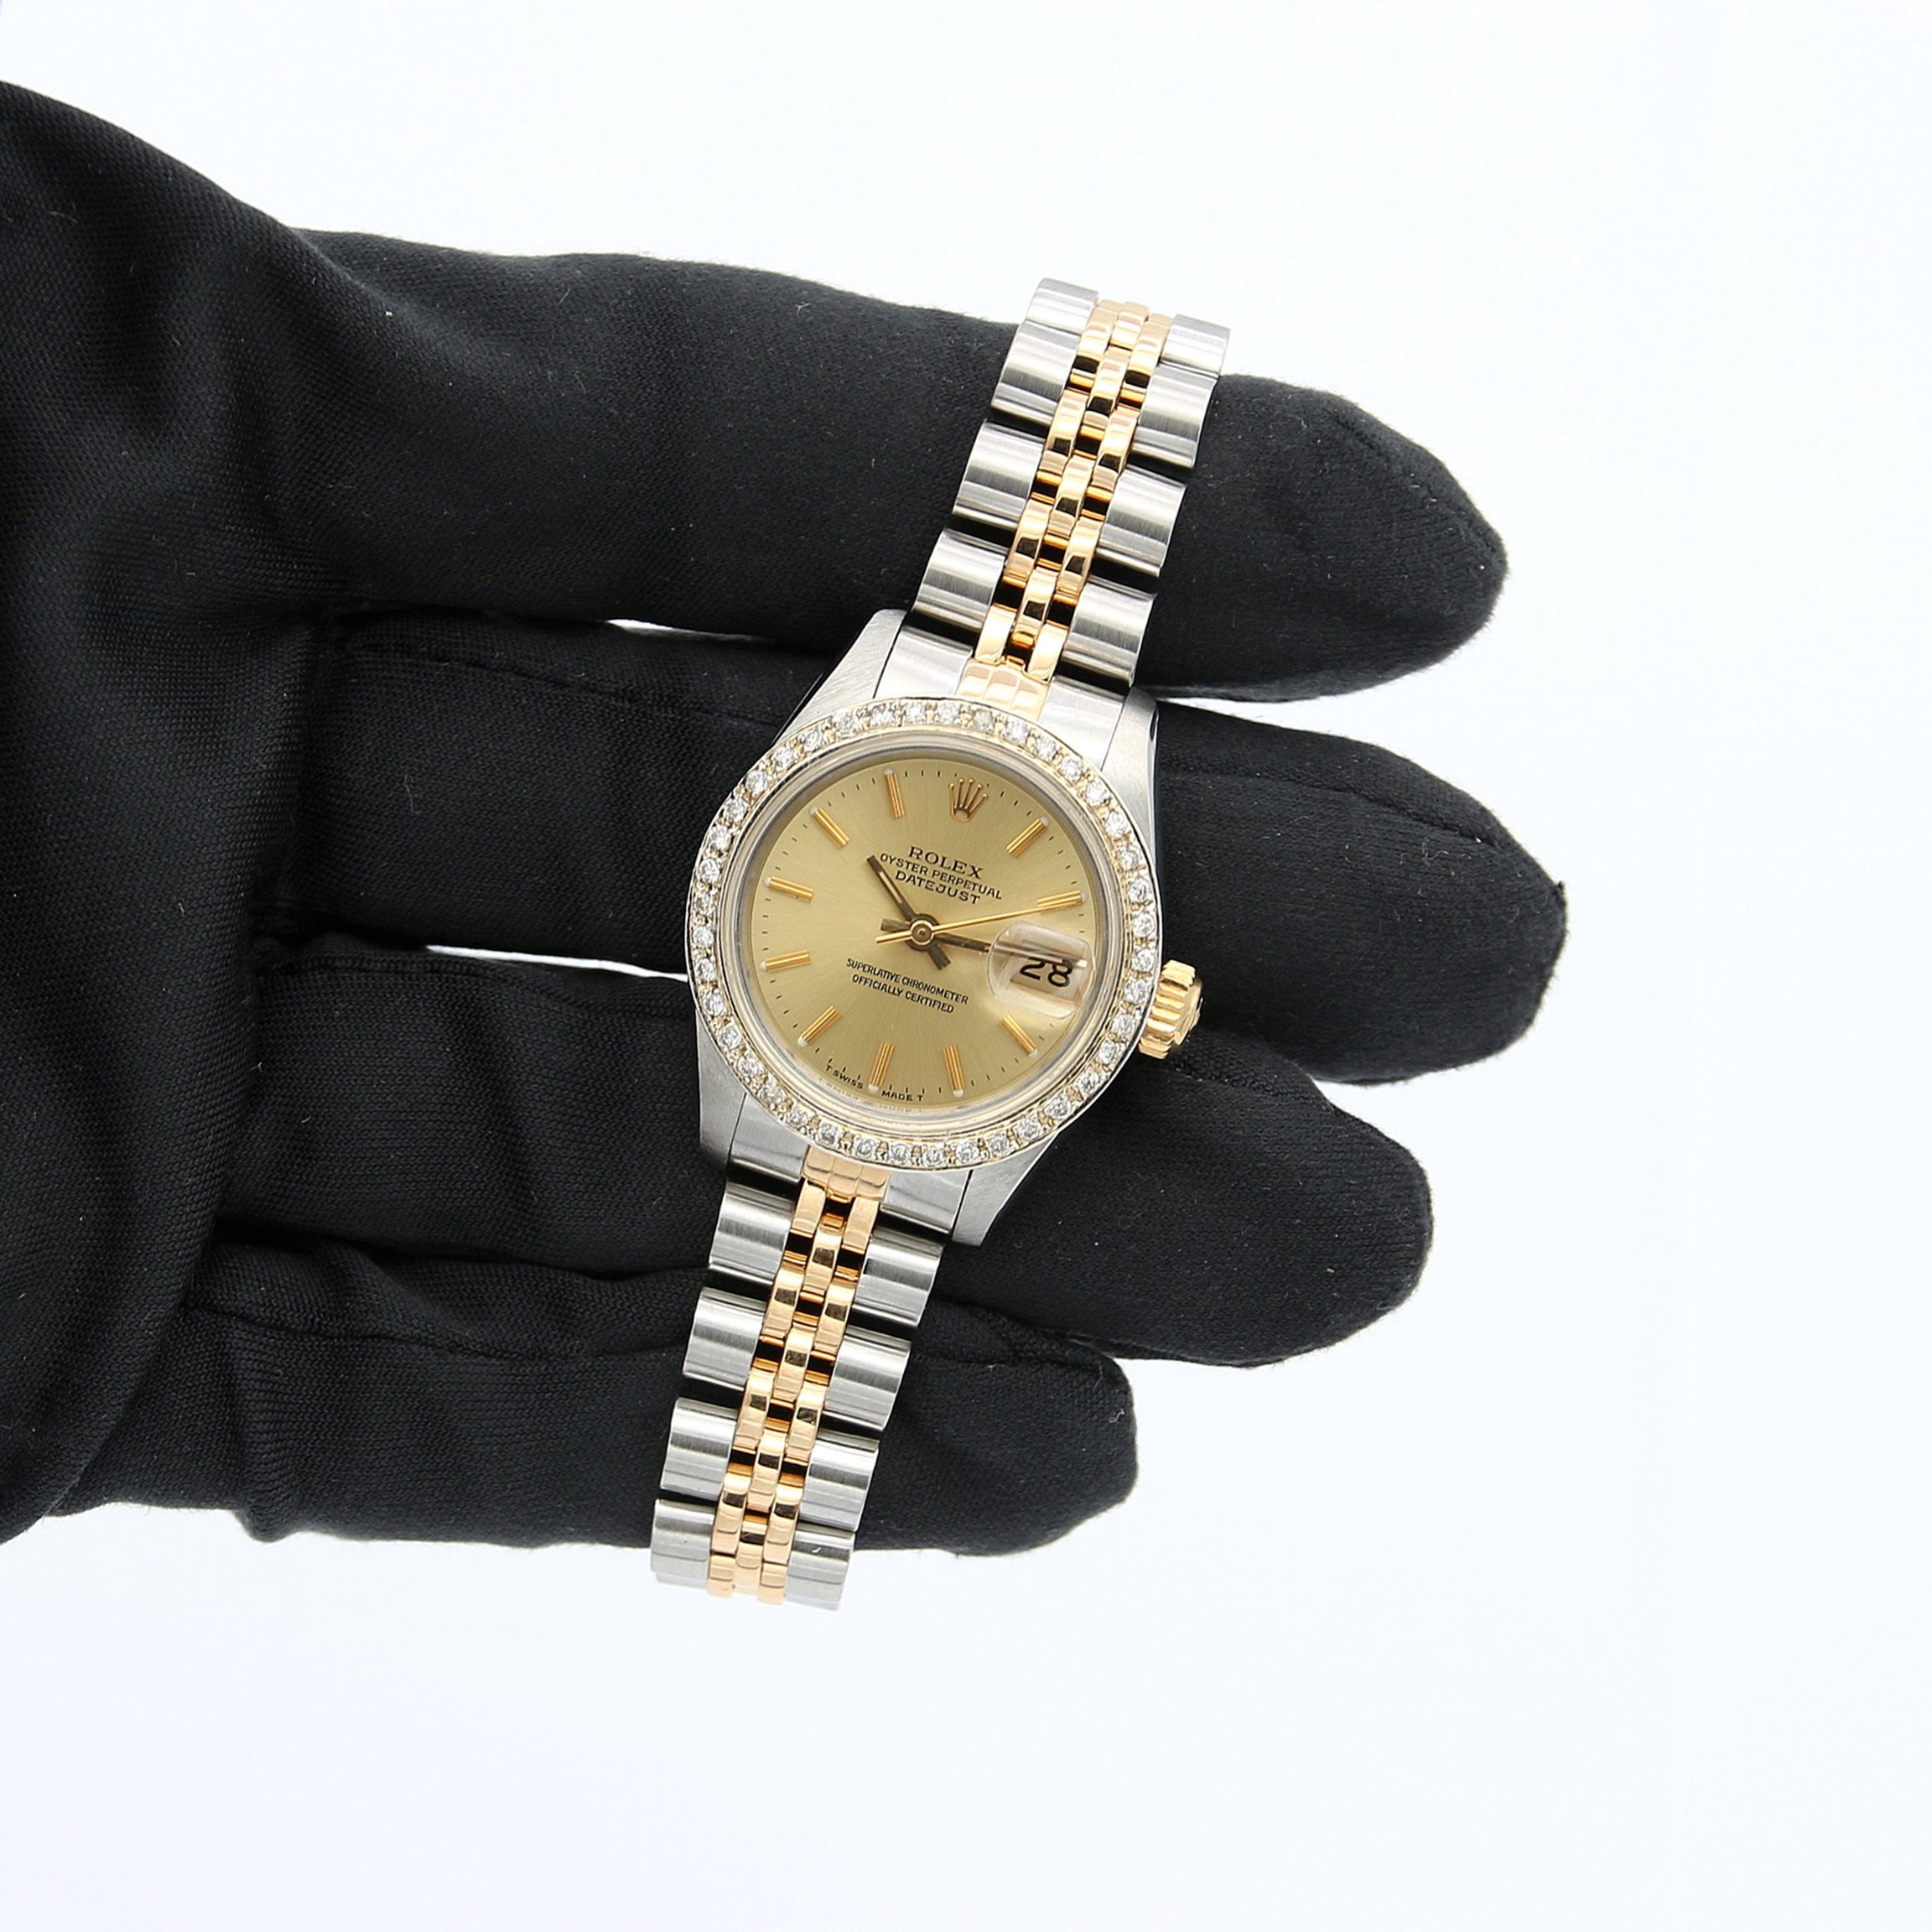 Rolex Lady-Datejust 28, Oystersteel and 18k Yellow Gold, Ref